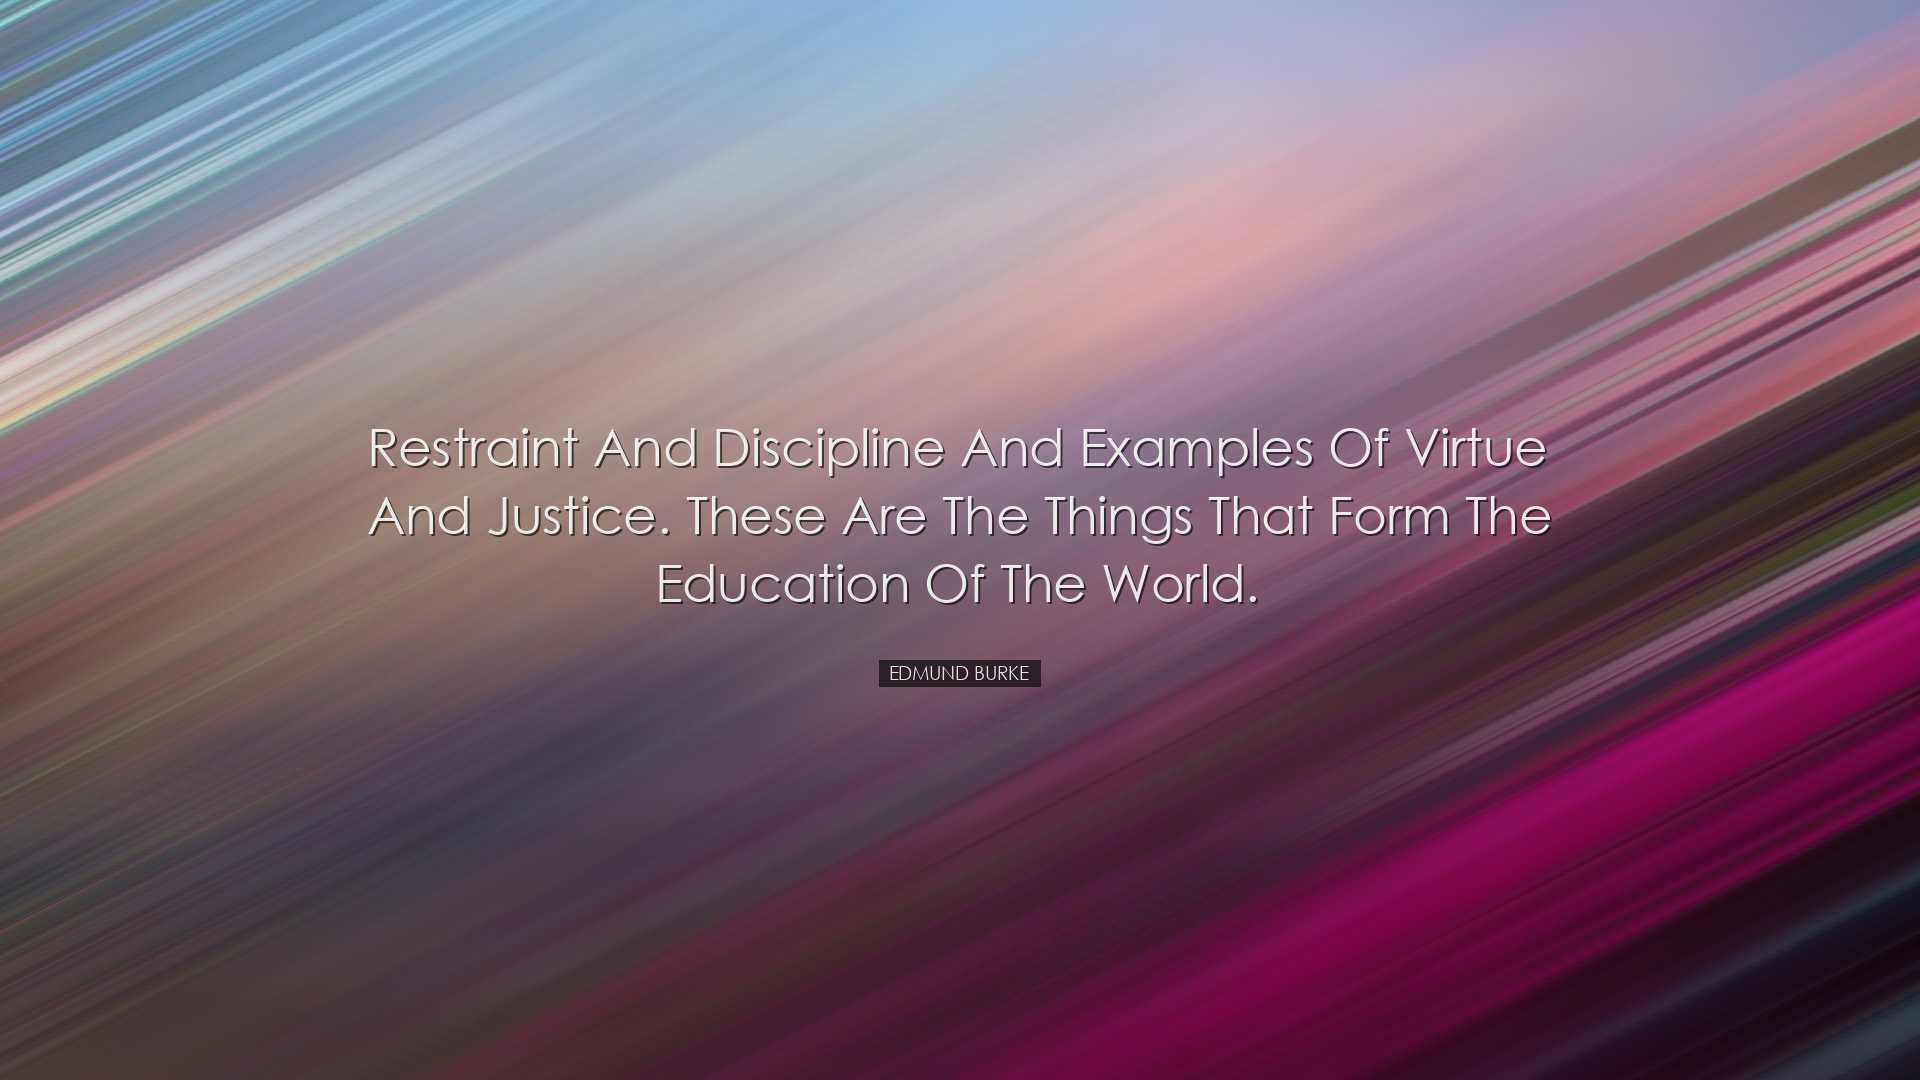 Restraint and discipline and examples of virtue and justice. These